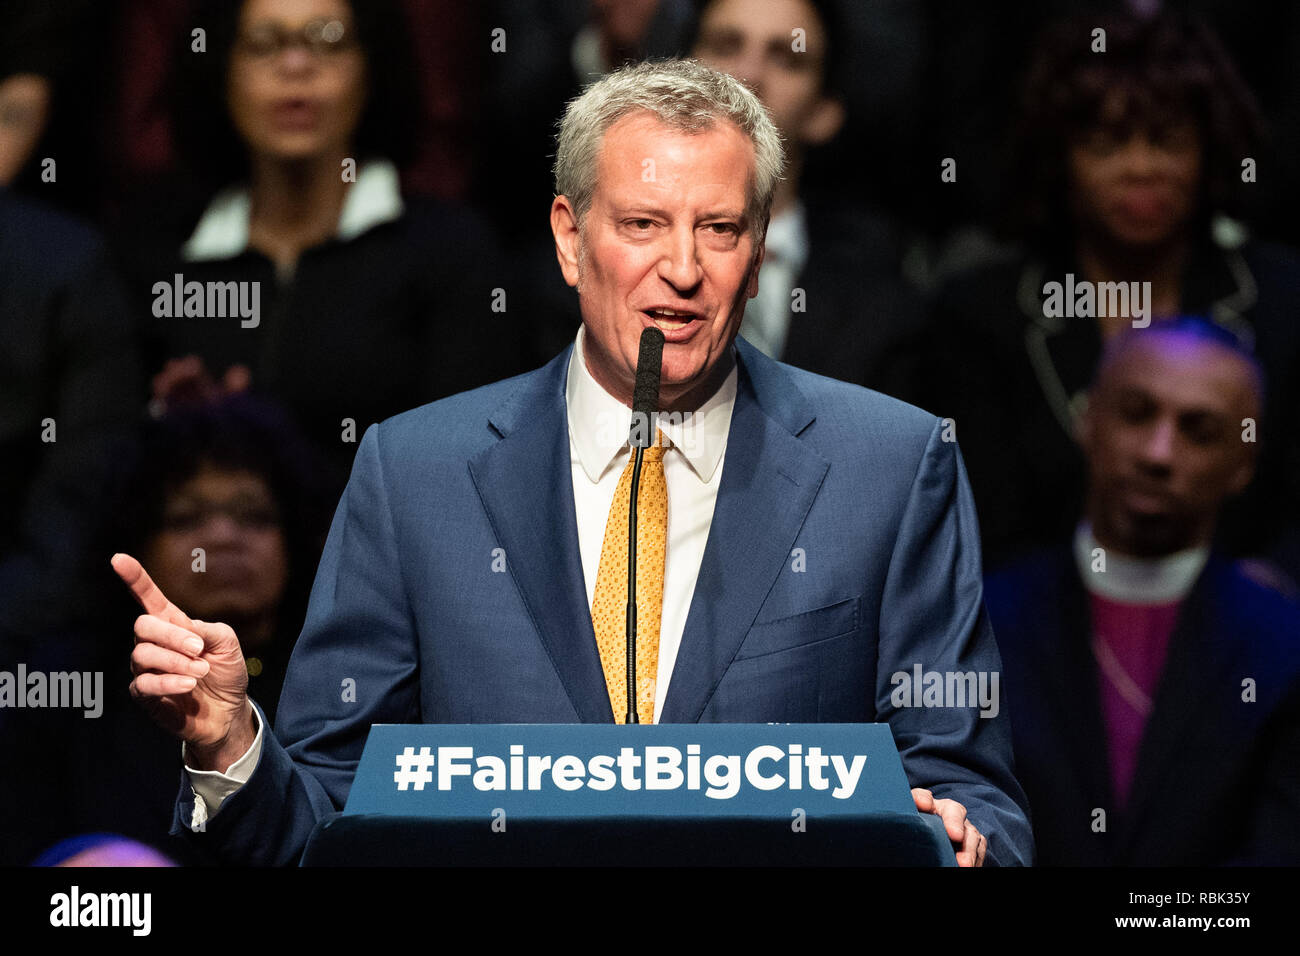 New York City Mayor Bill de Blasio seen speaking at the State of the City Address at the Peter Jay Sharp Theater at Symphony Space in New York City. Stock Photo